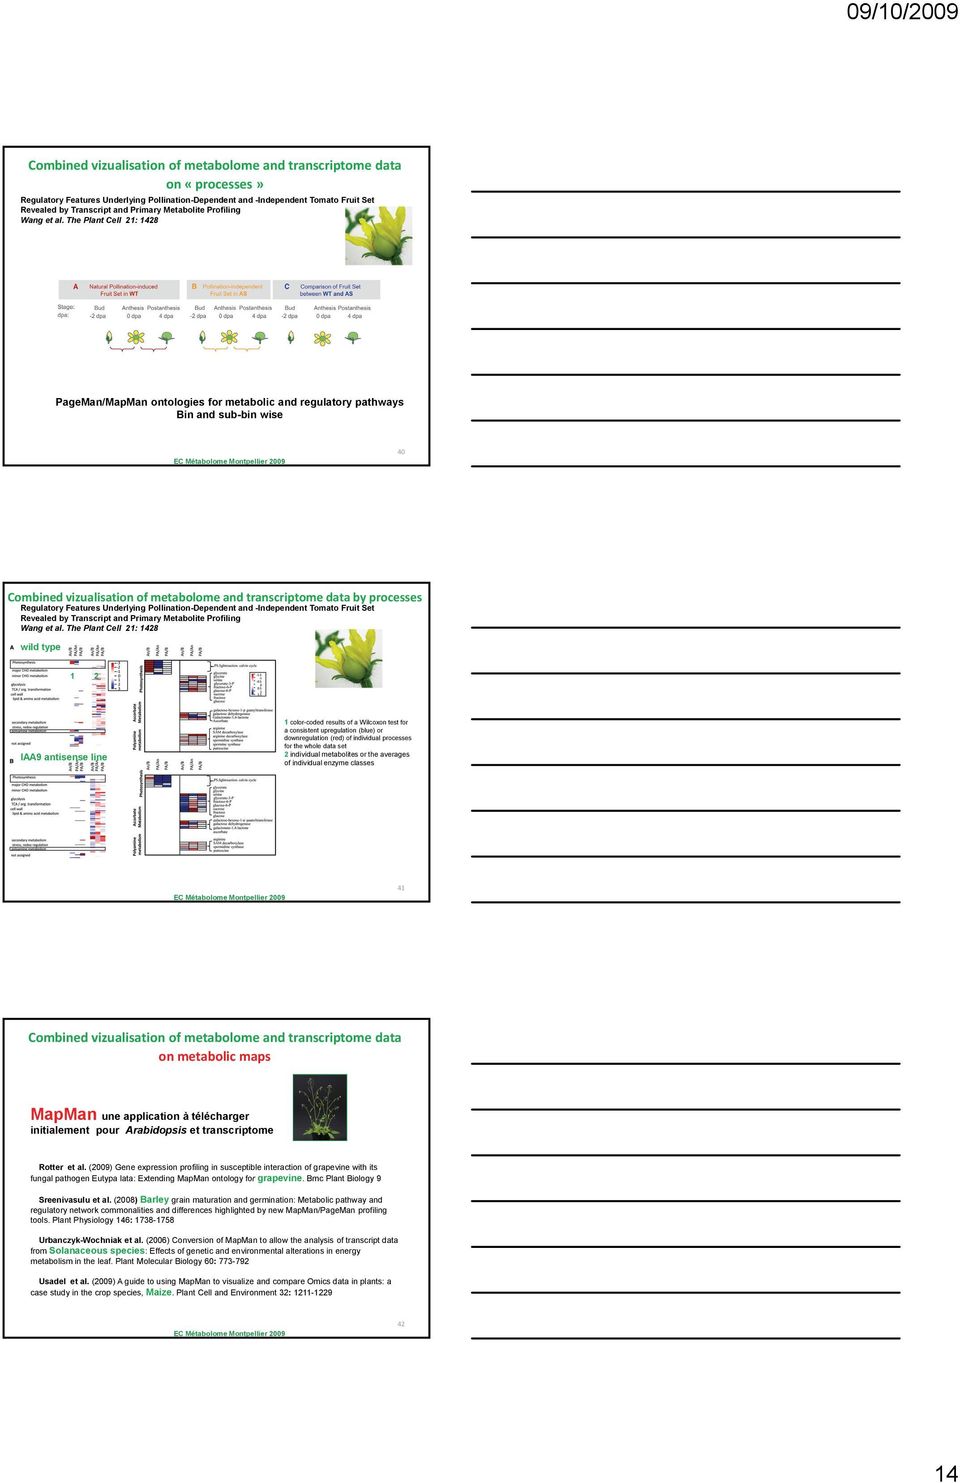 The Plant Cell : 48 PageMan/MapMan ontologies for metabolic and regulatory pathways Bin and sub-bin wise 4 Combined vizualisation of metabolome and transcriptome data by processes Regulatory Features